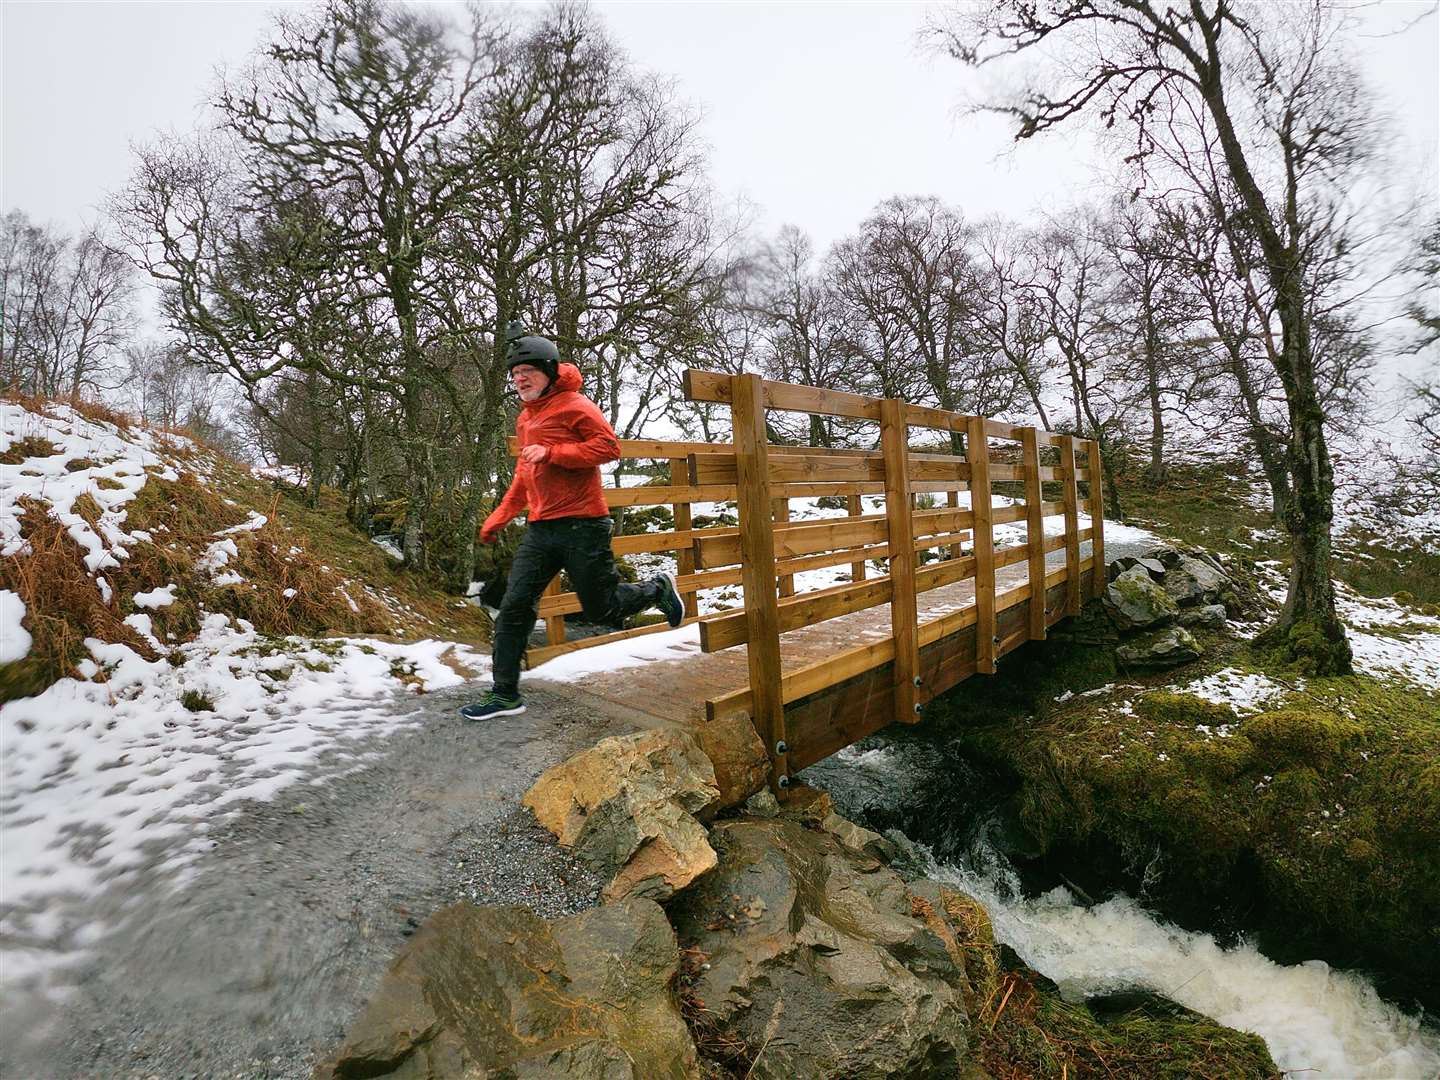 Graeme Ambrose descending towards Fort Augustus on the South Loch Ness Trail.